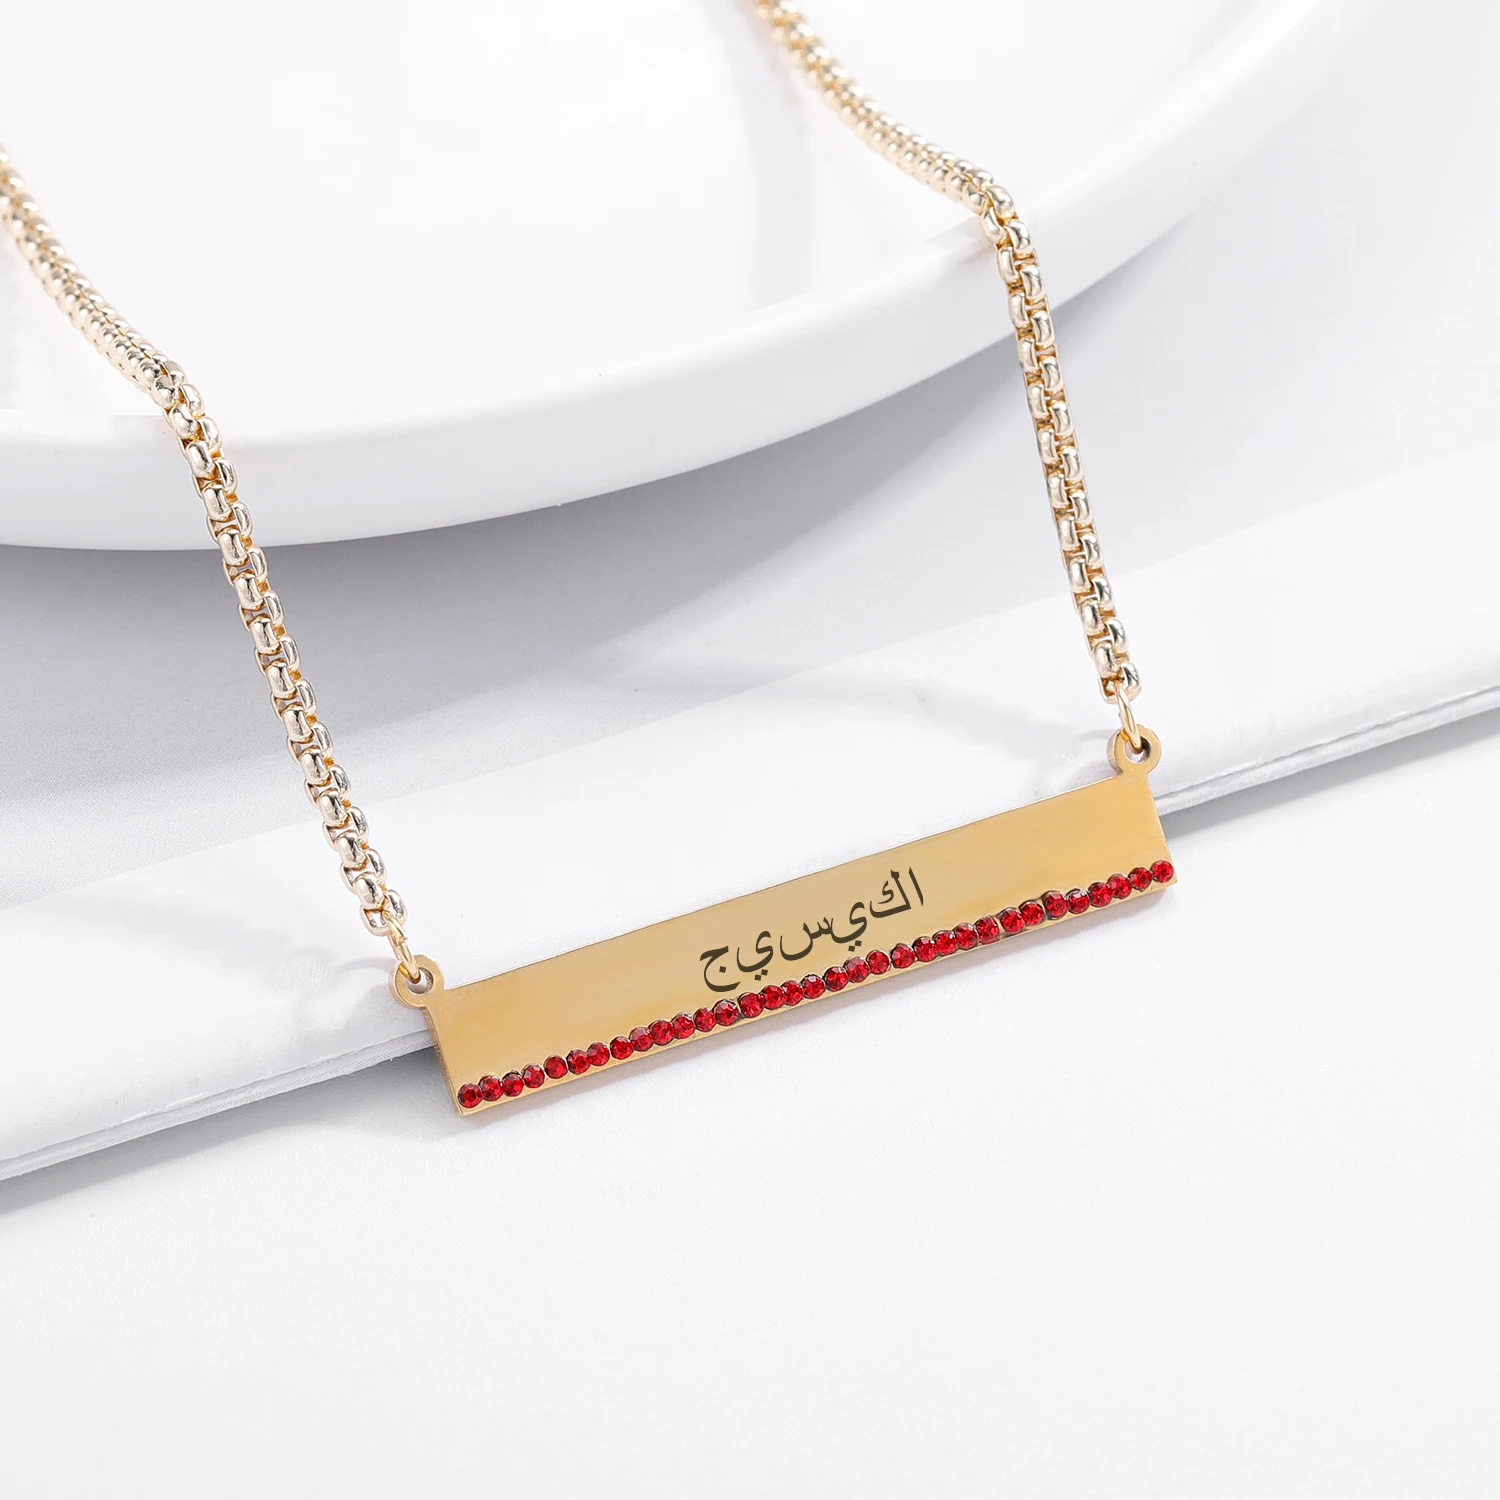 

Personalized Bar Necklace Customized Engraved Name Necklace Gold Stainless Steel Nameplate Necklace Custom Made with Any Name